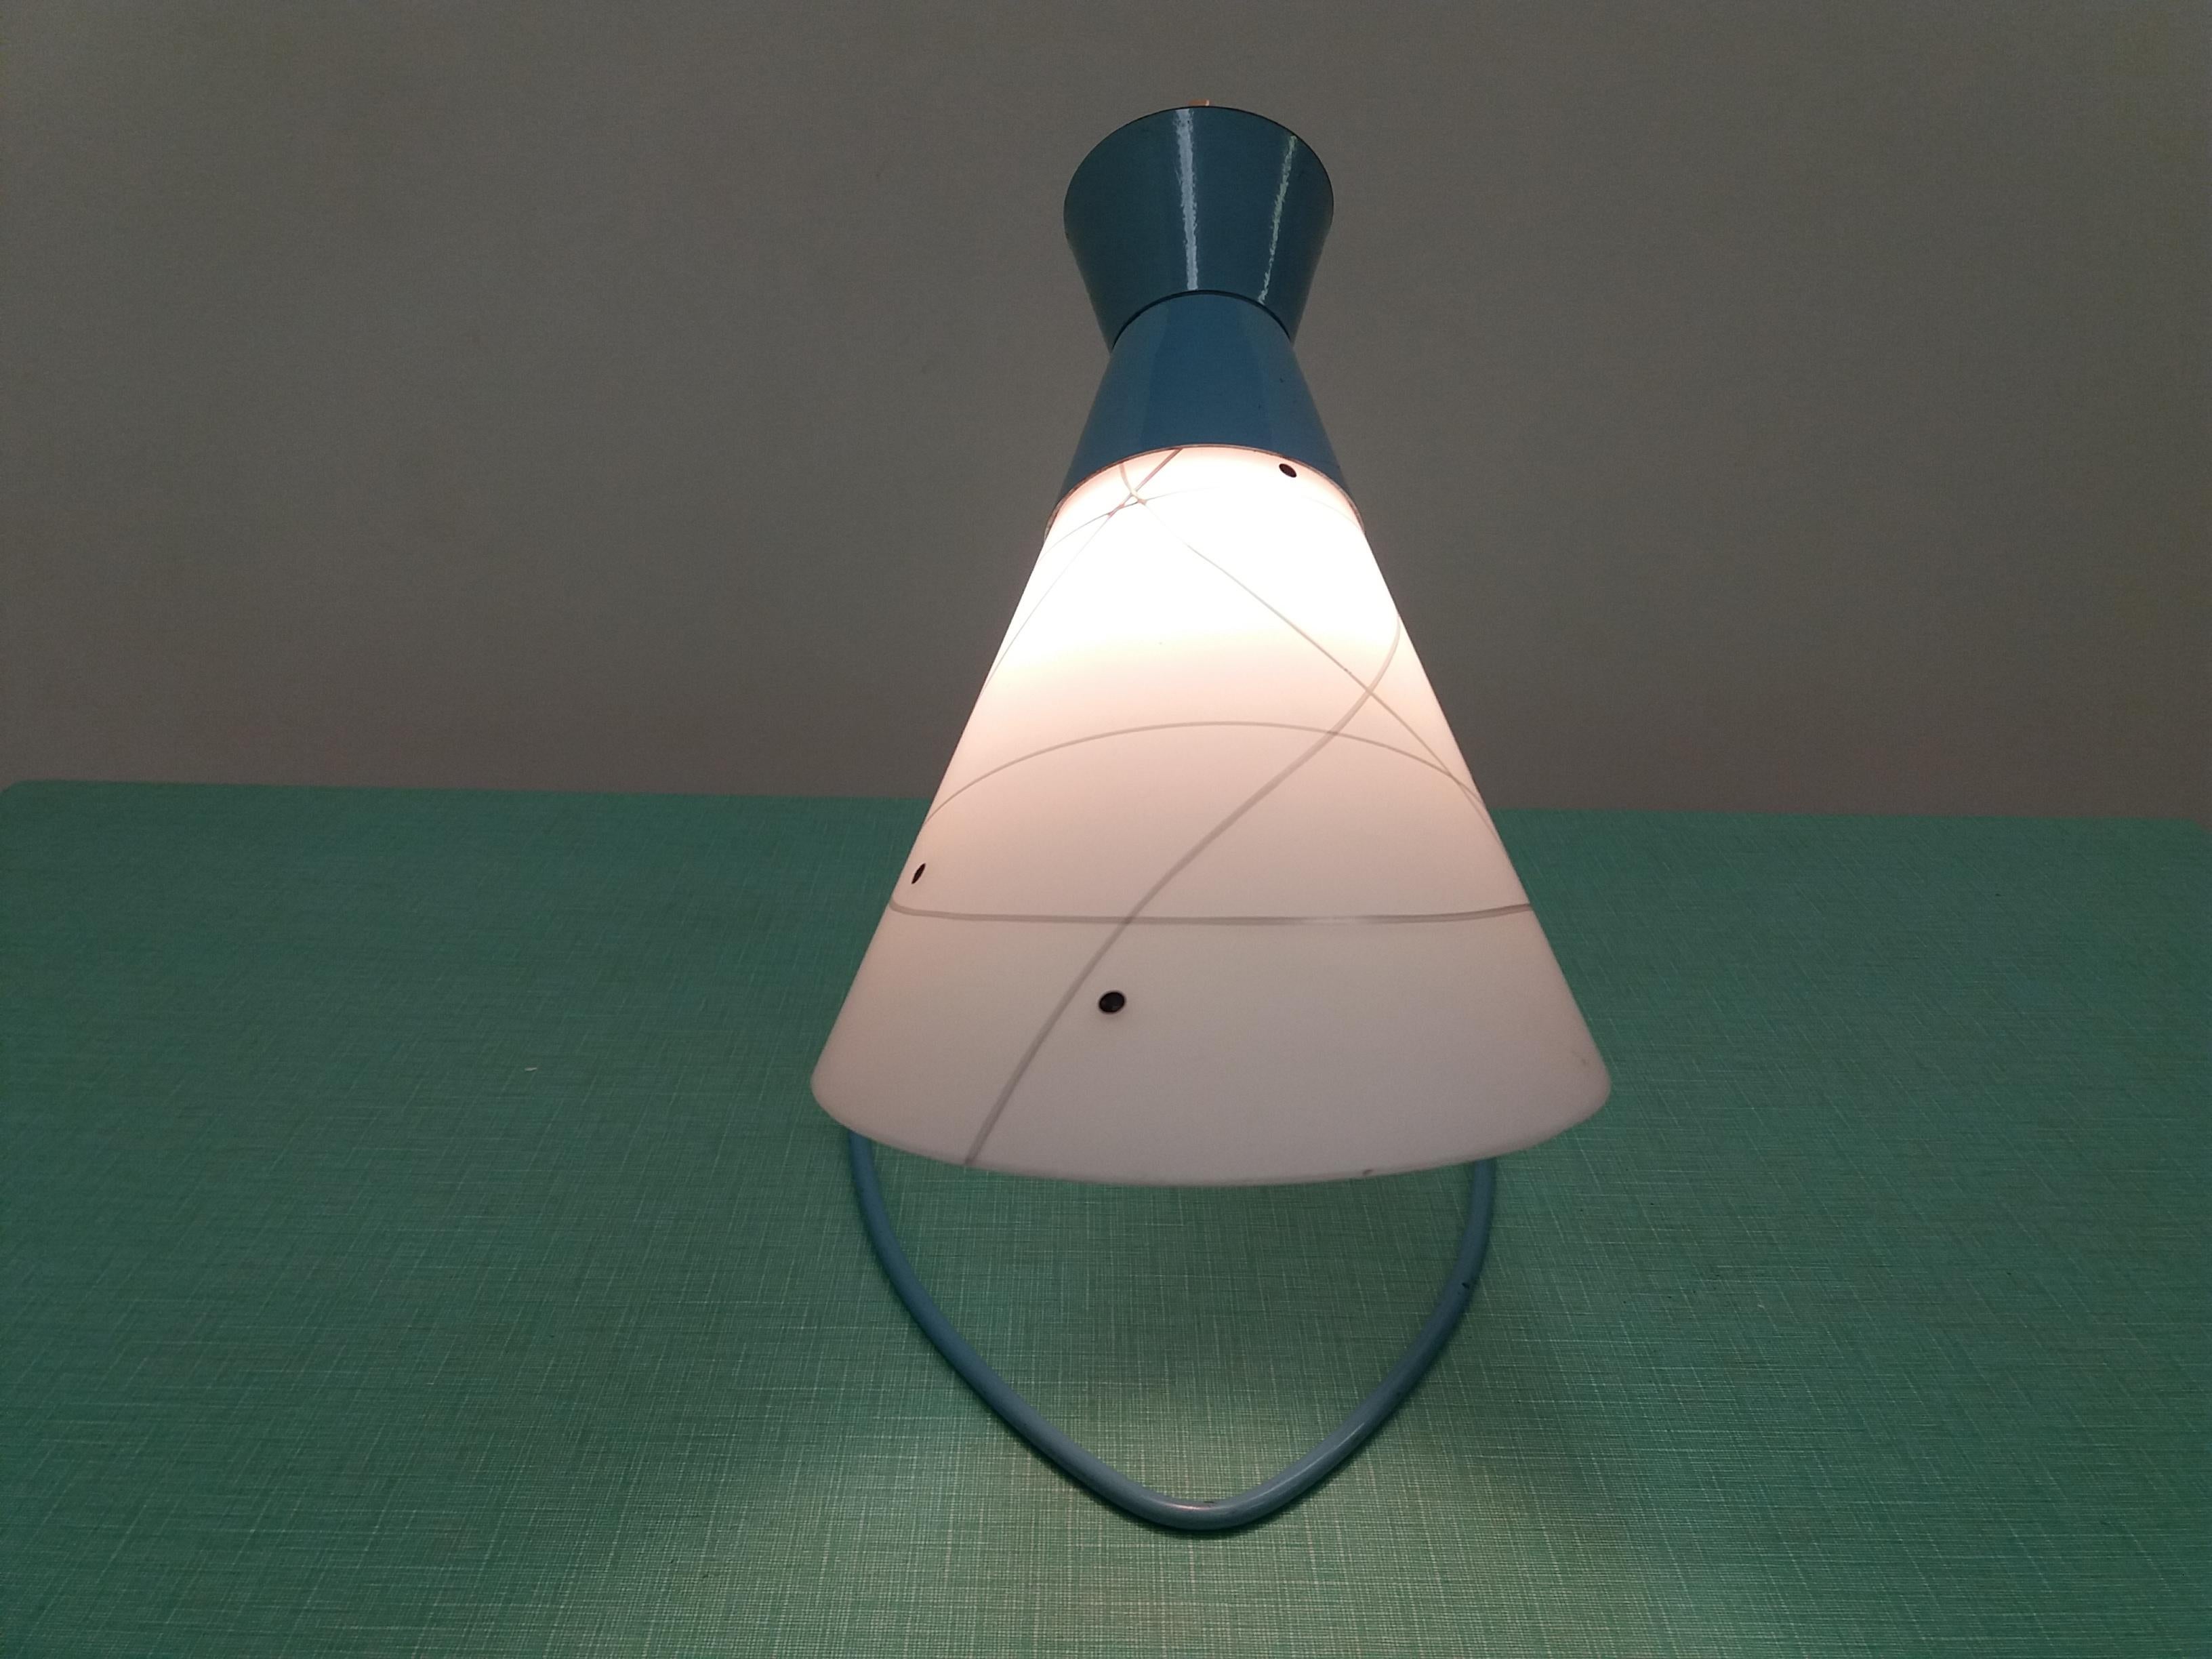 Mid-Century Modern Midcentury Table Lamp Designed by Josef Hůrka for Napako, 1958 For Sale